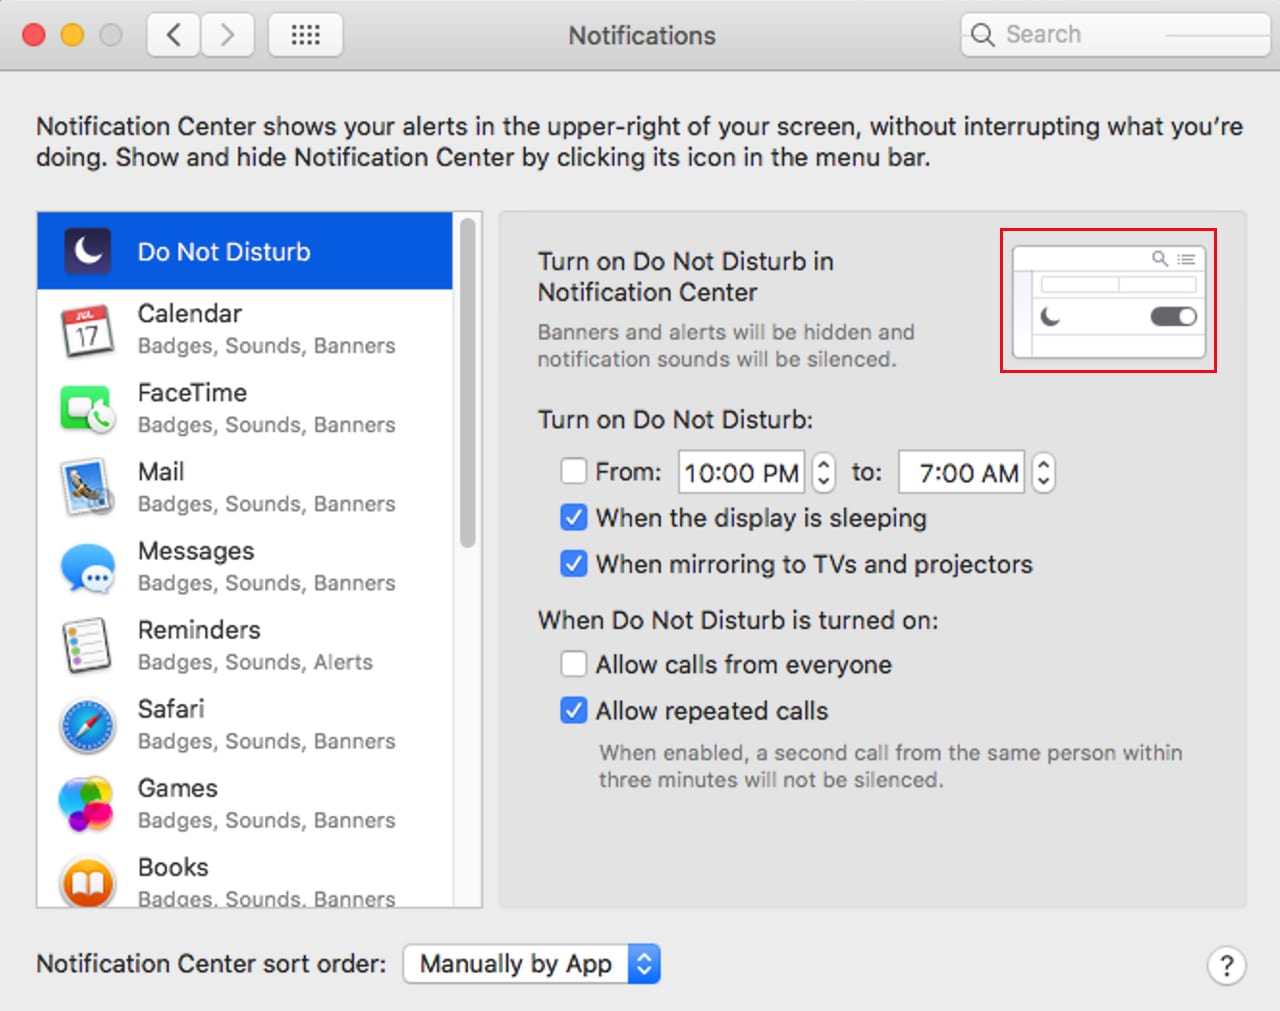 Customize Do Not Distrub settings of the Notification Center.